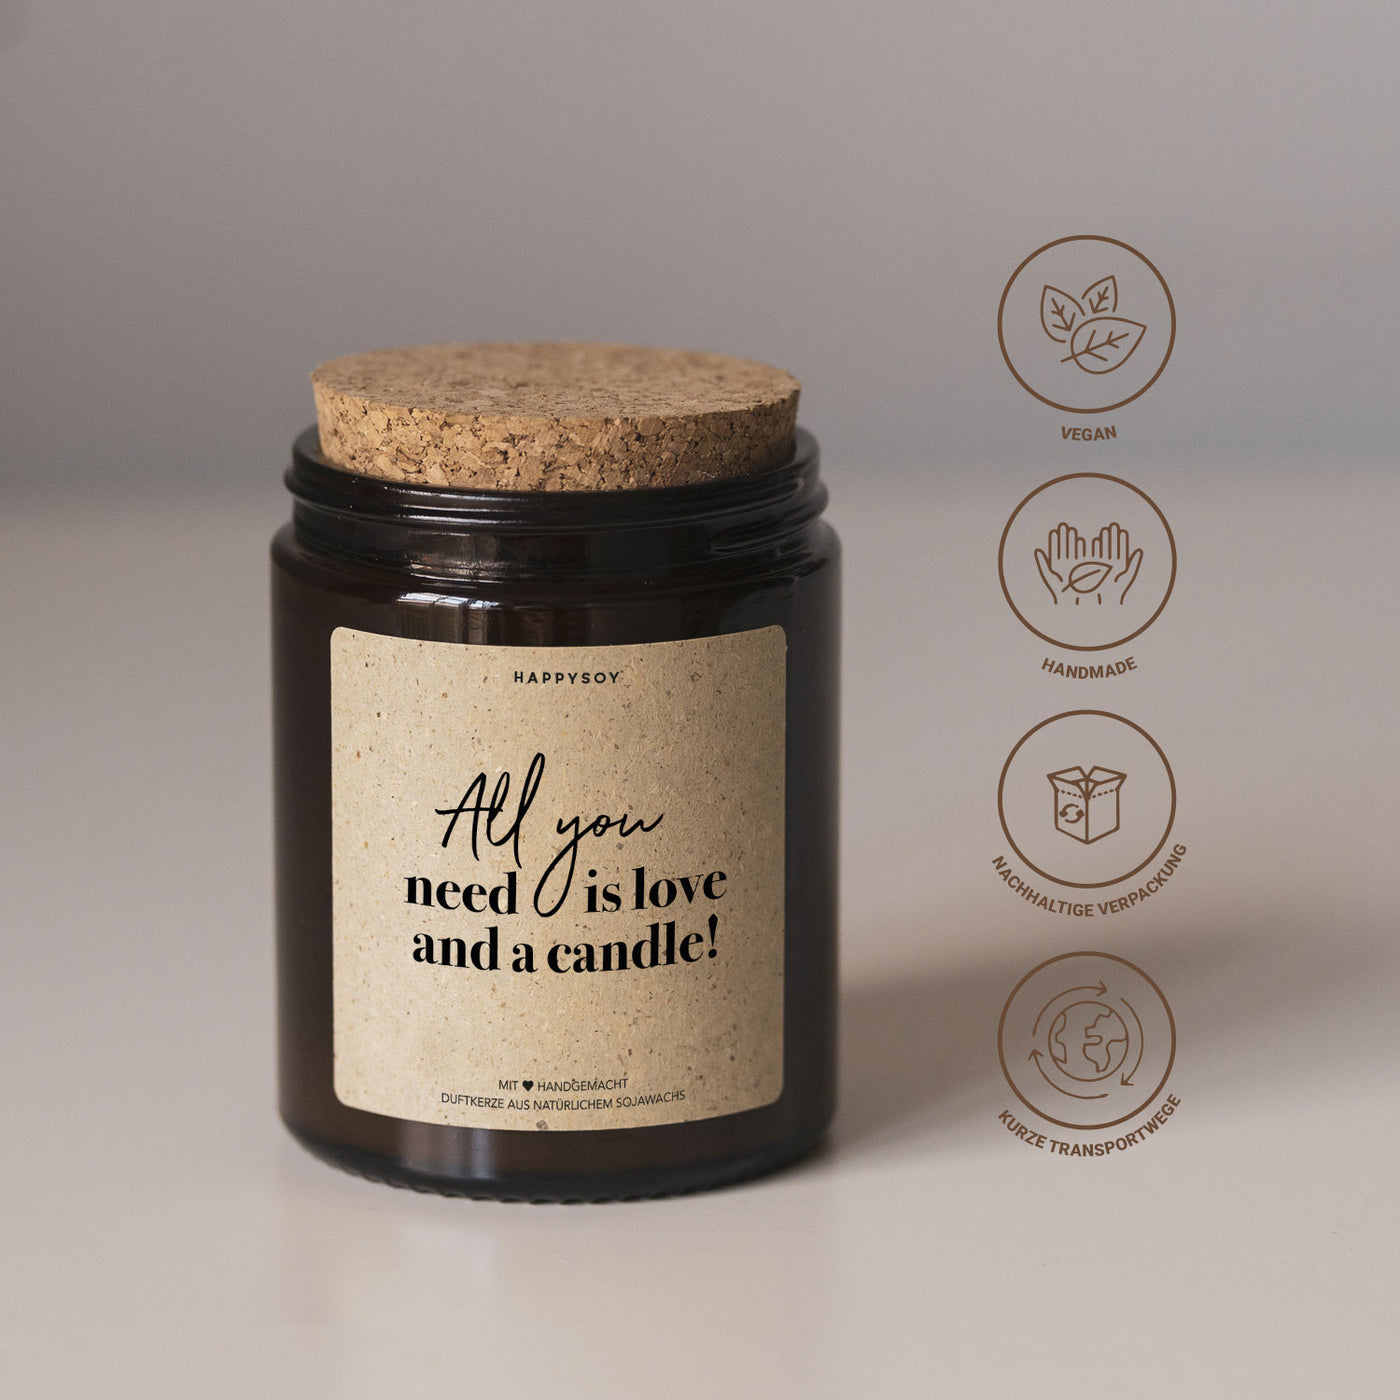 sojawachs-duftkerze-apothekerglas-all-you-need-is-love-and-a-candle